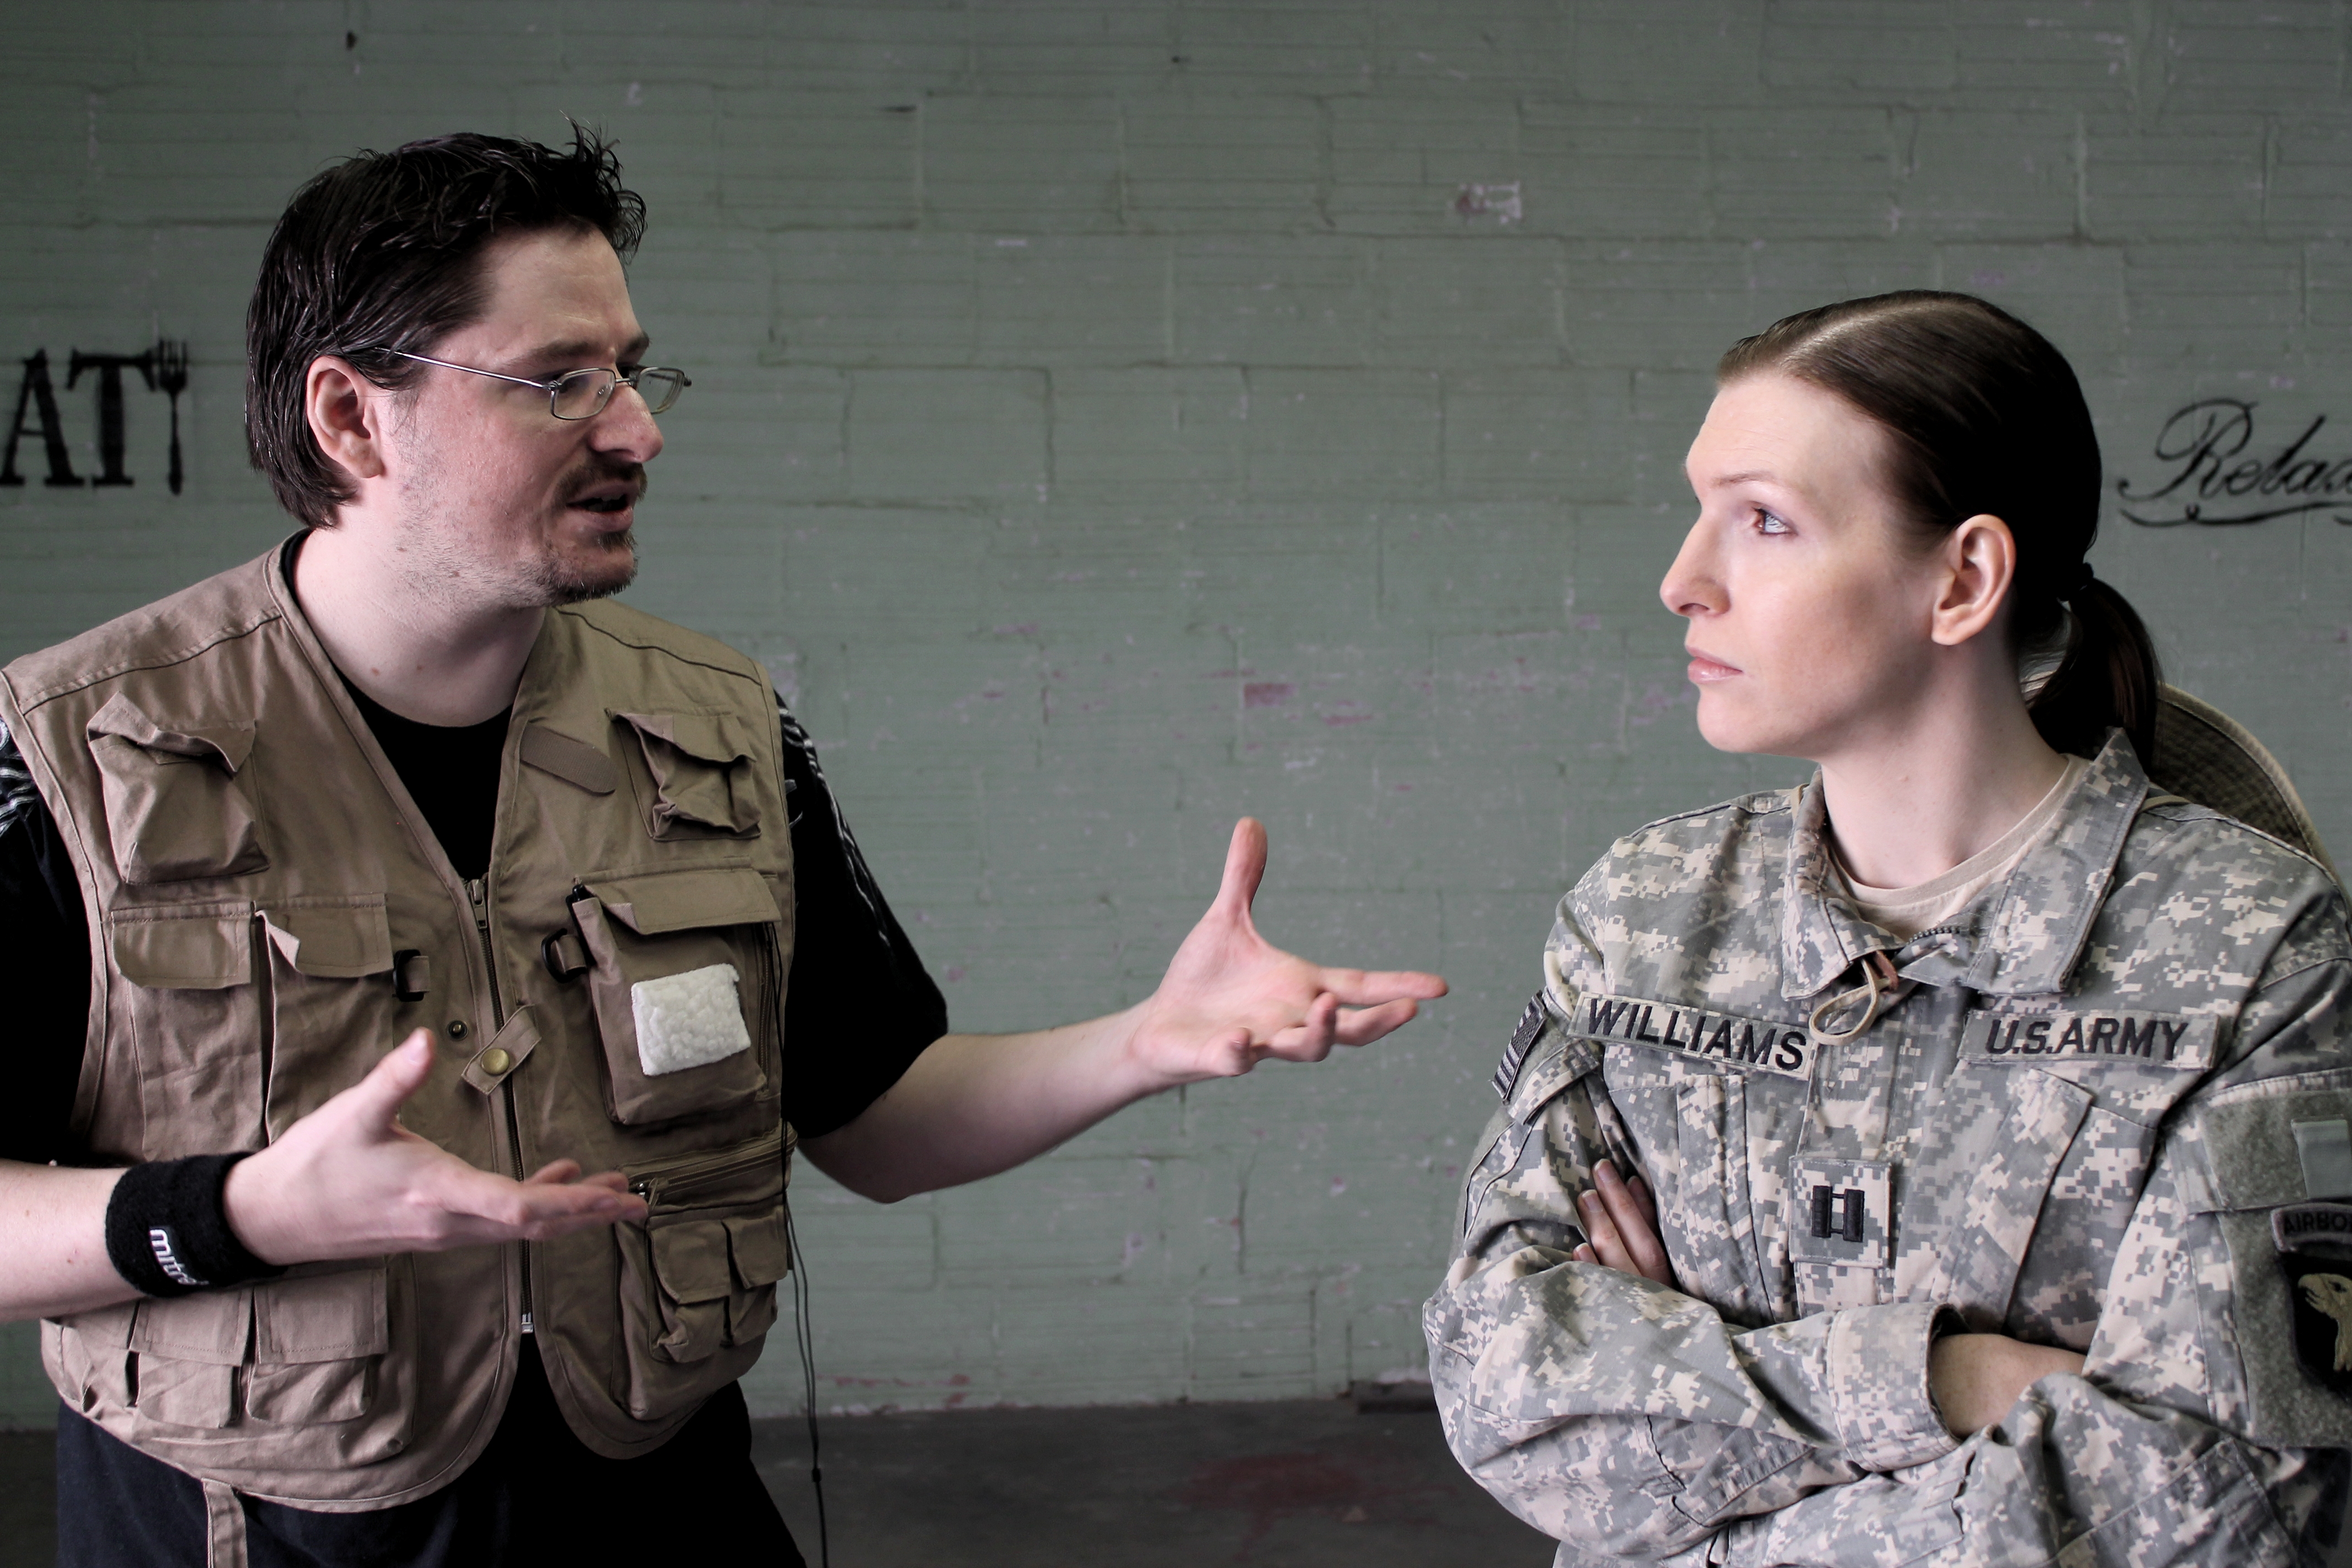 Director Shawn Lecrone giving direction to leading lady Danielle Maitland on the Torture Scene in the movie Southwest